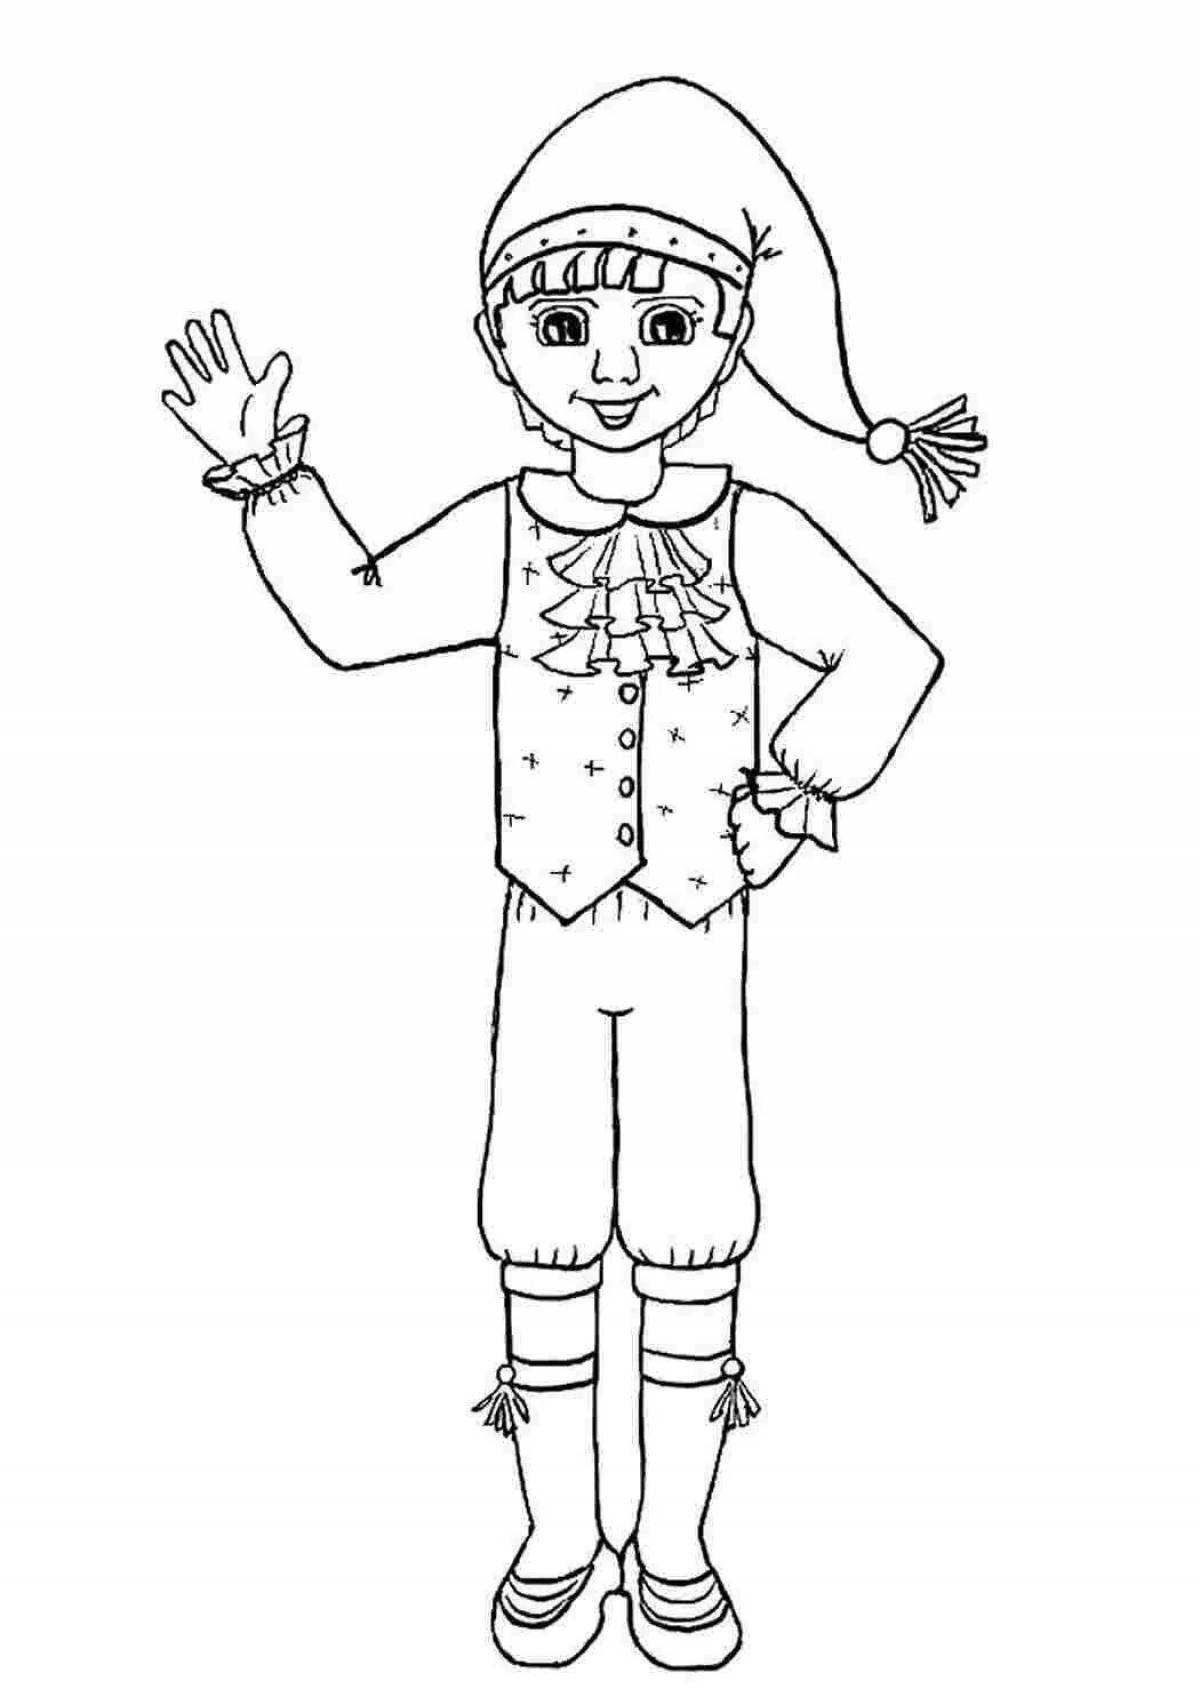 Adorable carnival costume coloring page